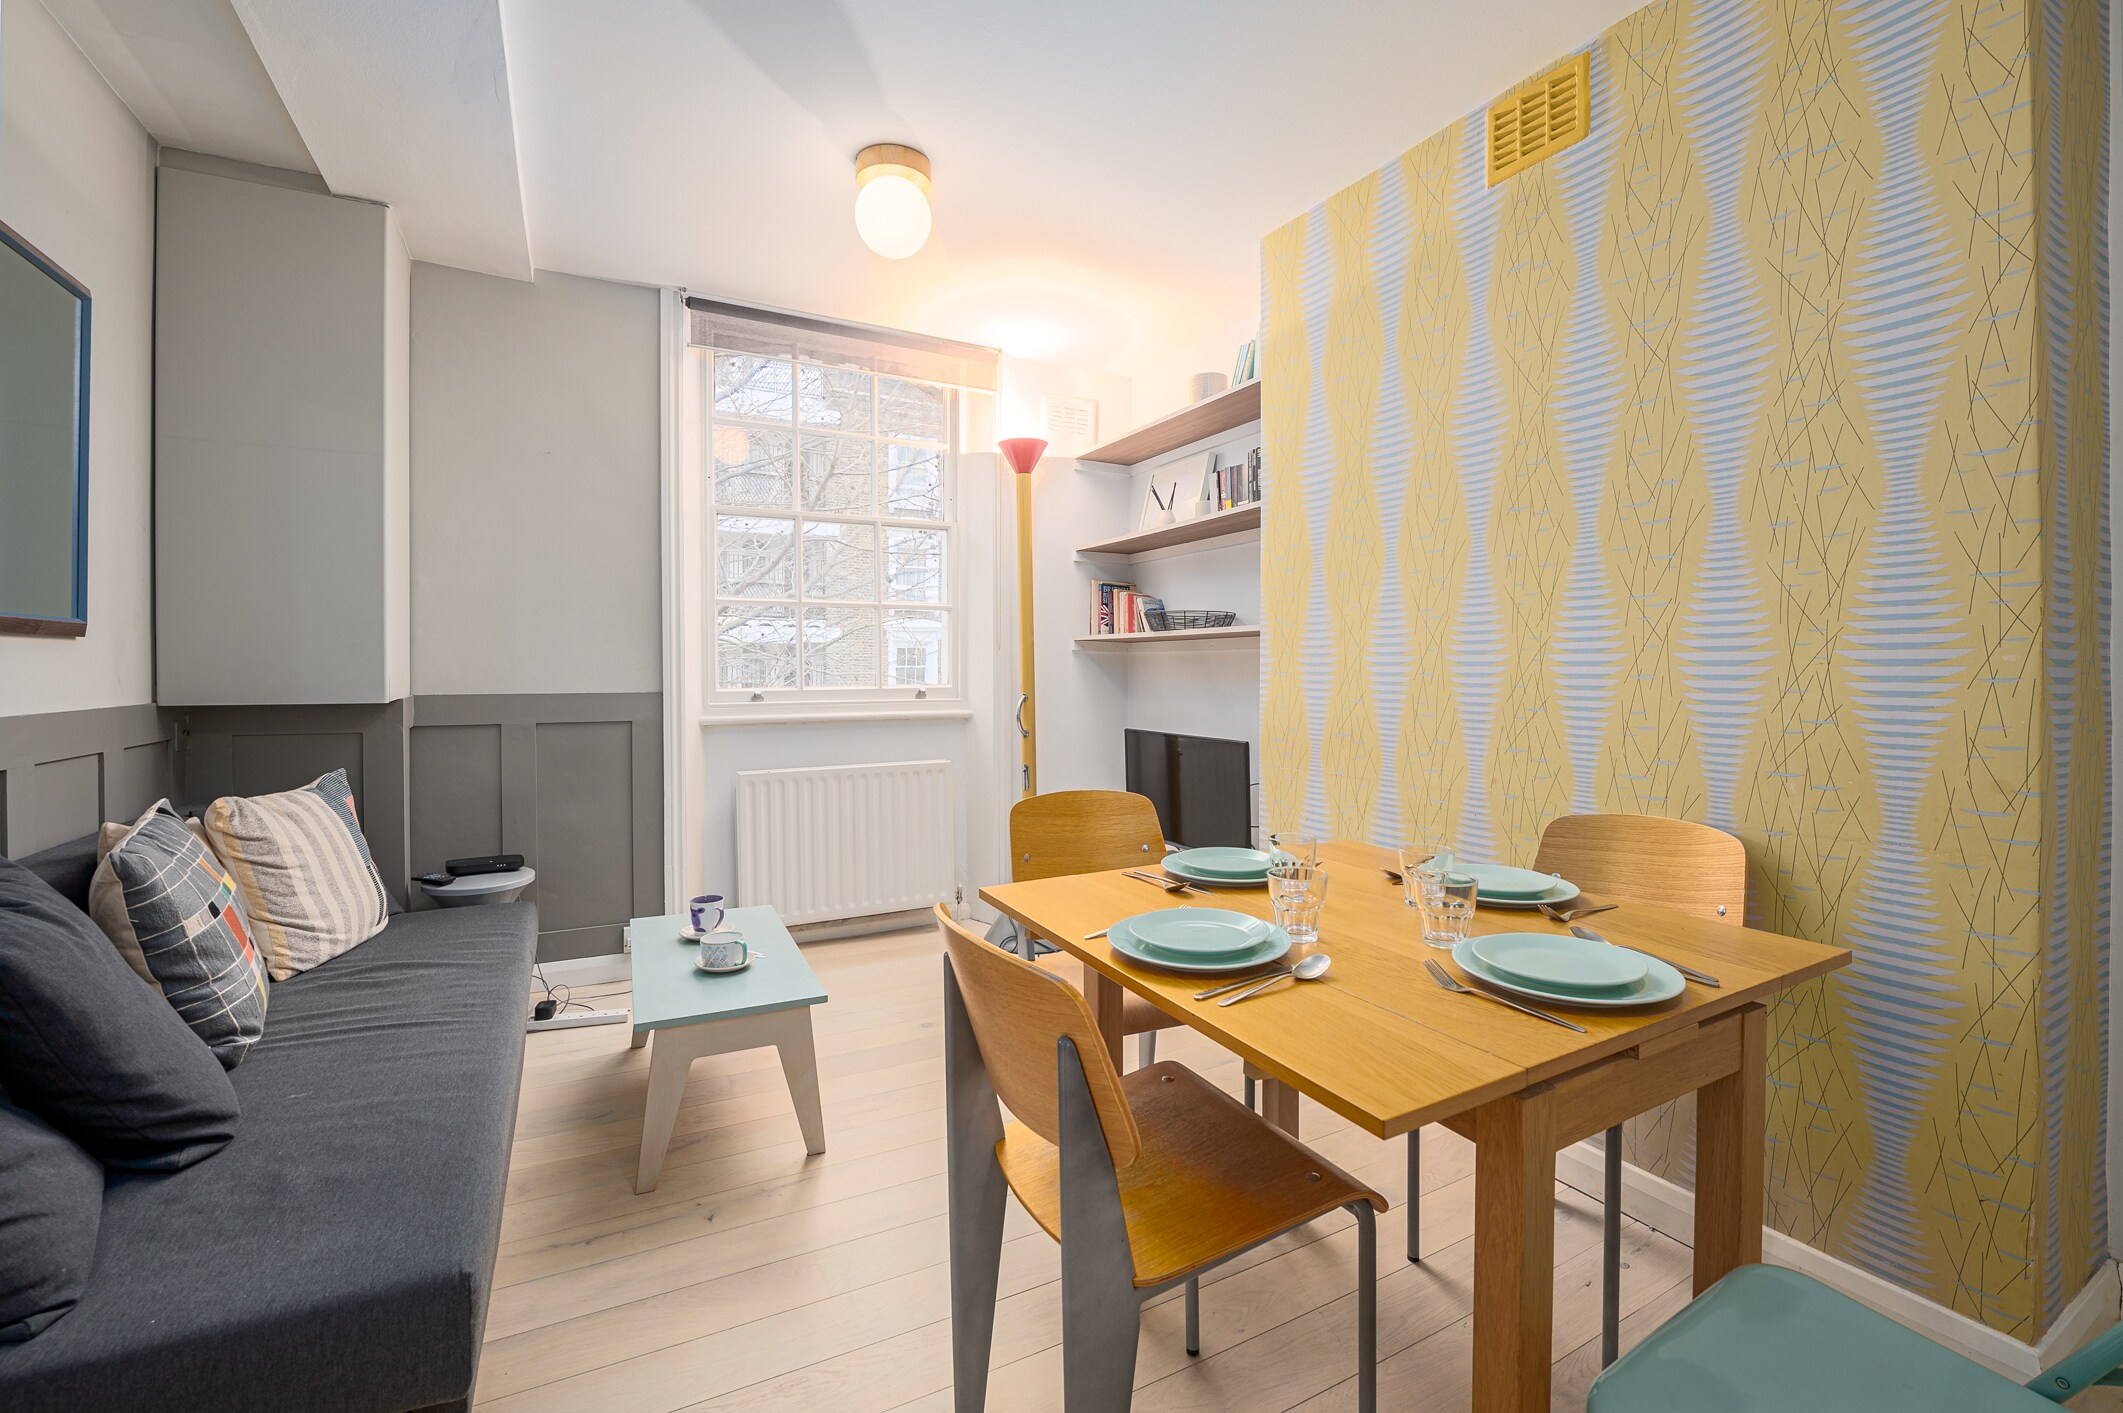 Property Image 1 - Fantastic two bedroom apartment in vibrant King’s Cross 